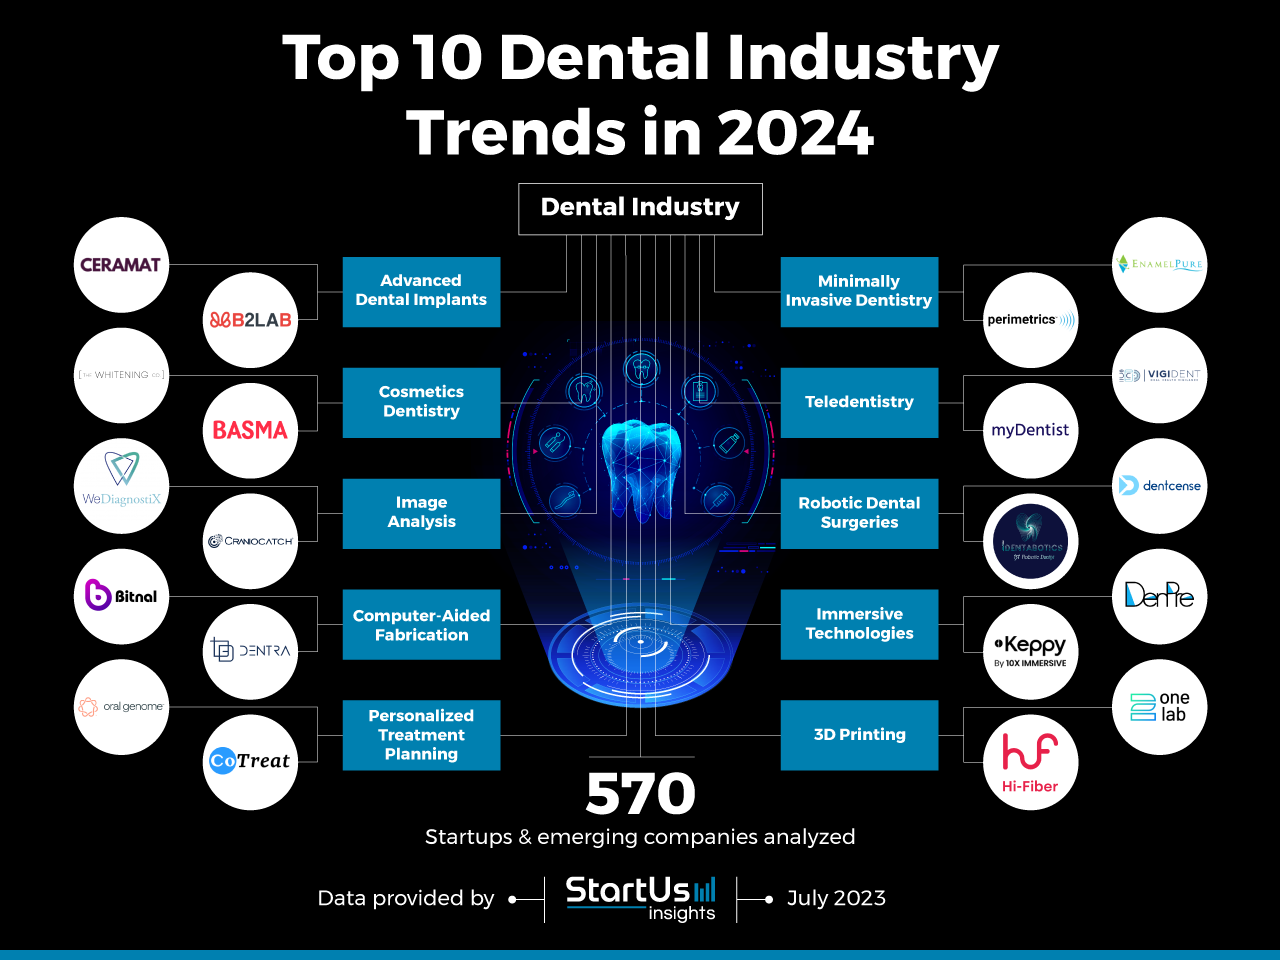 Uncover the Top 10 Dental Industry Trends in 2024